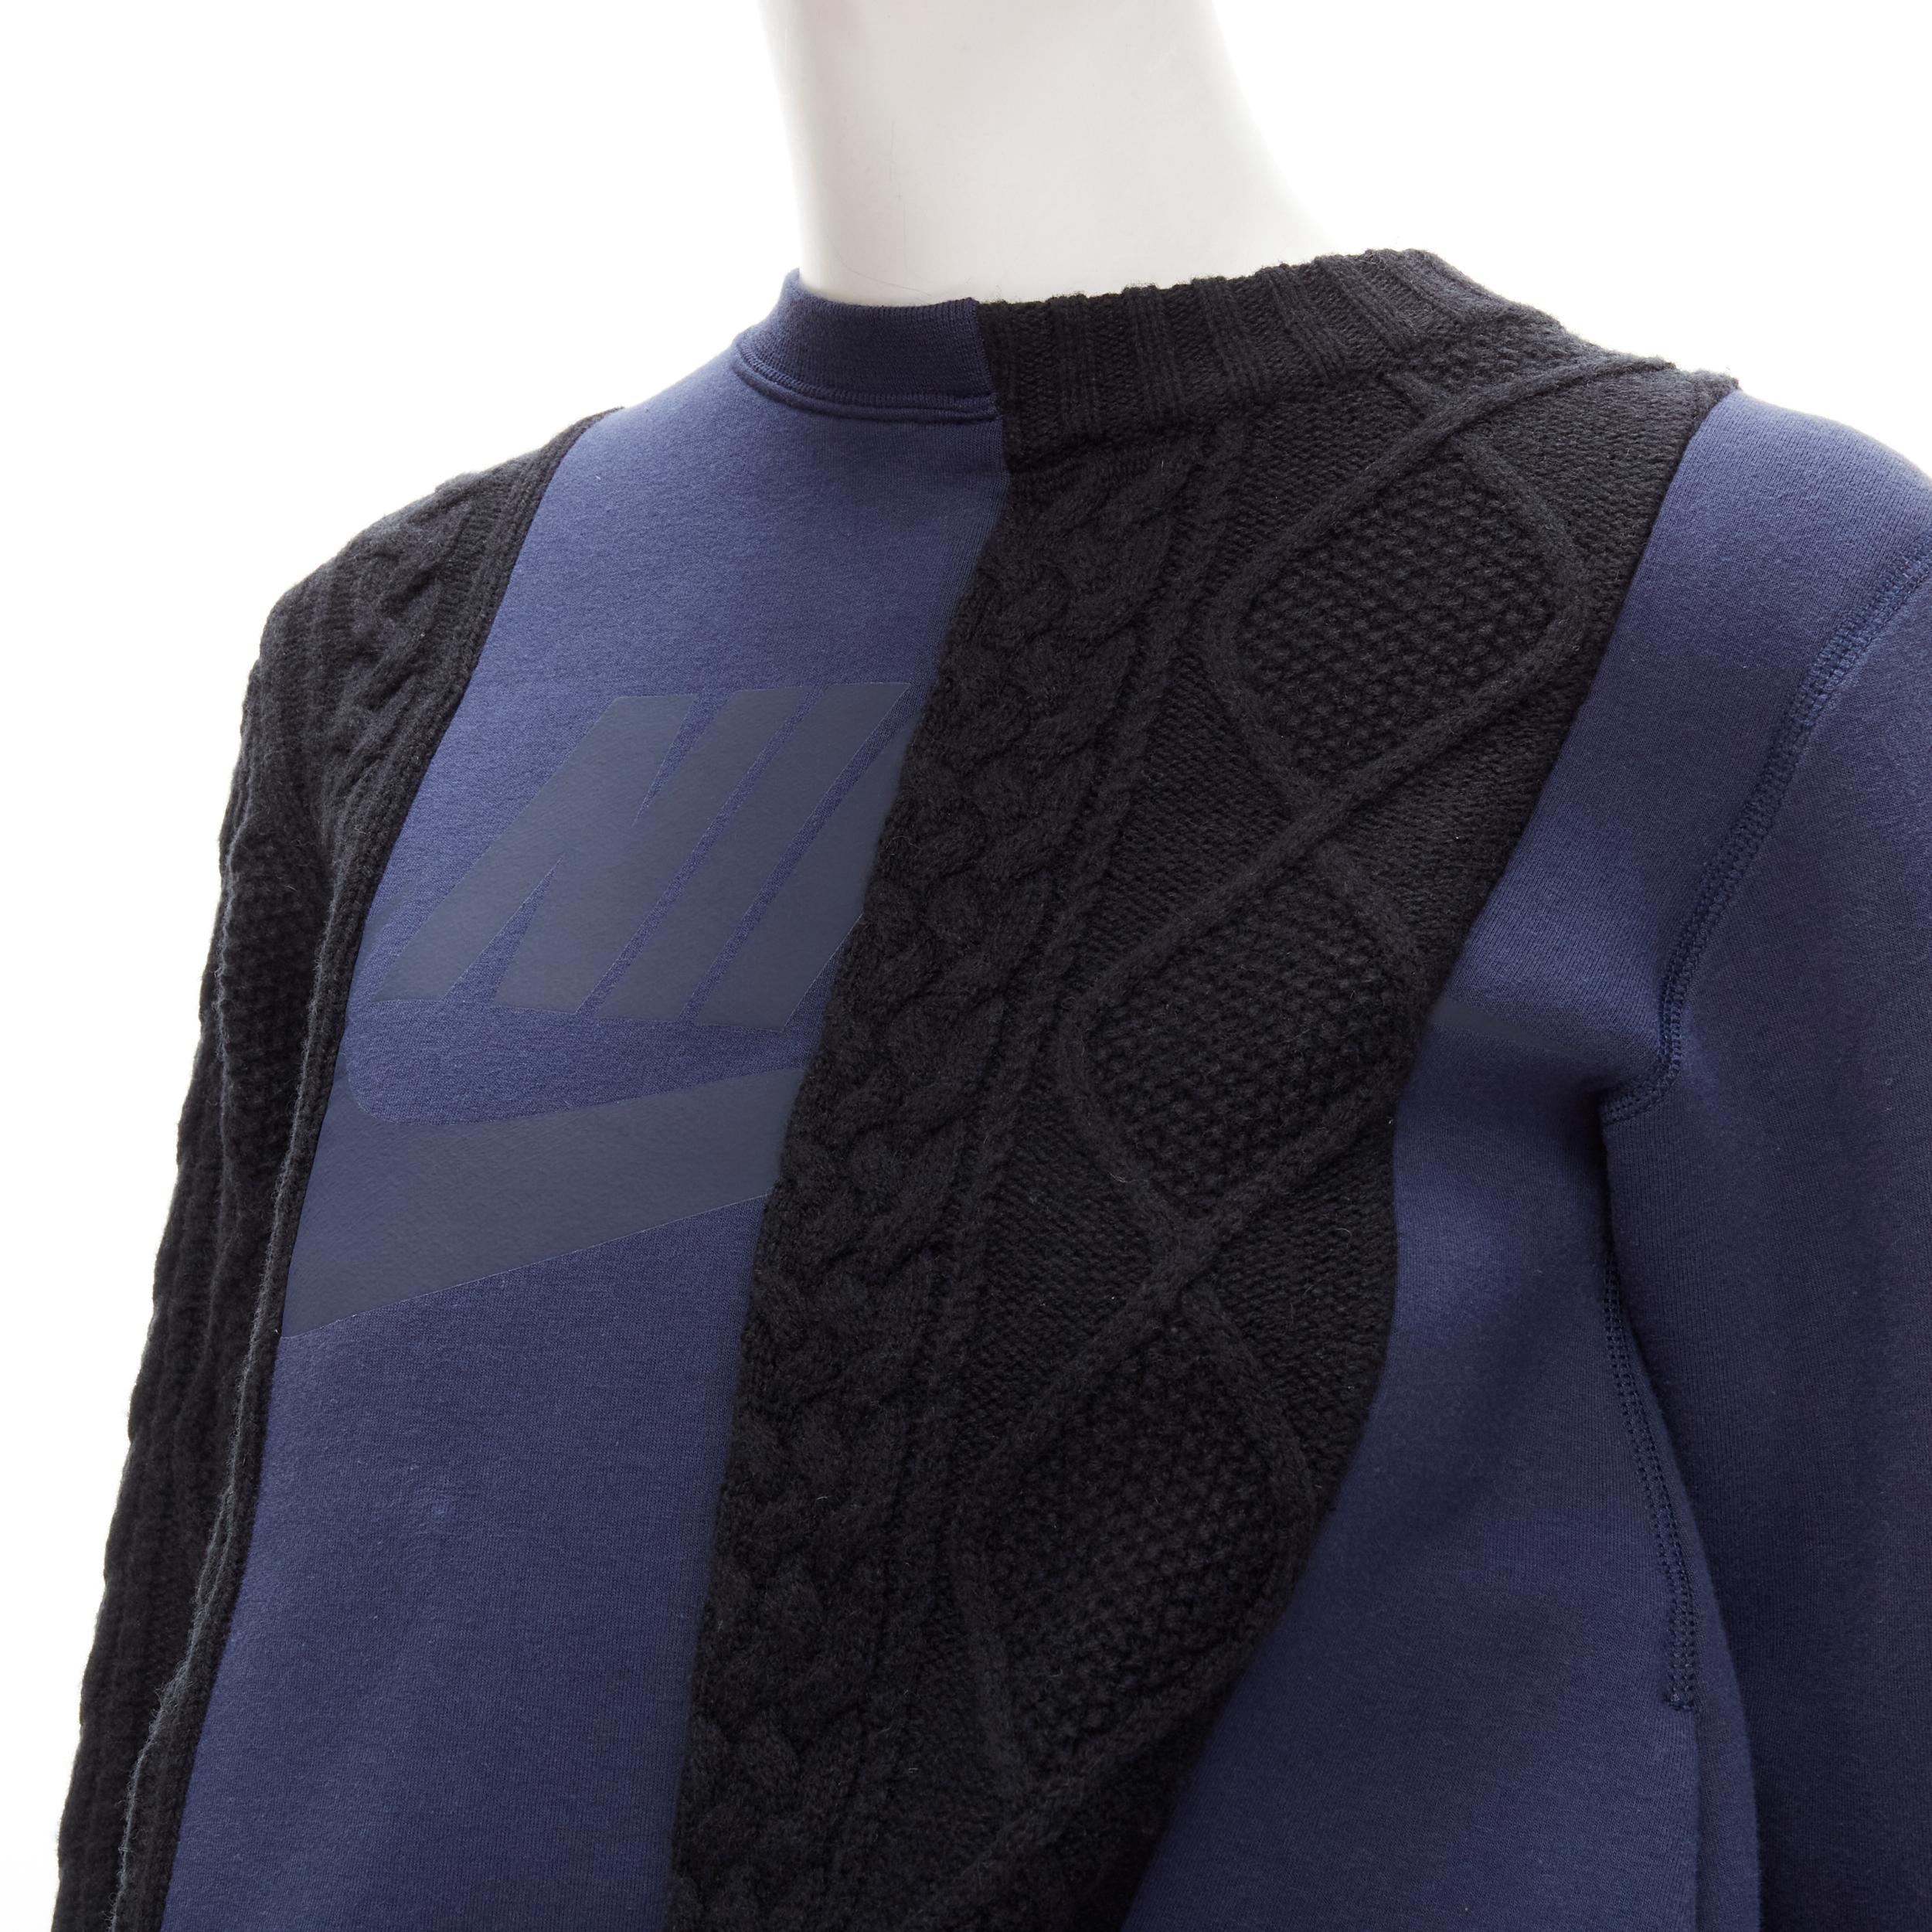 NIKE SACAI navy black deconstructed cable knit patchwork drawstring sweater XXS 1